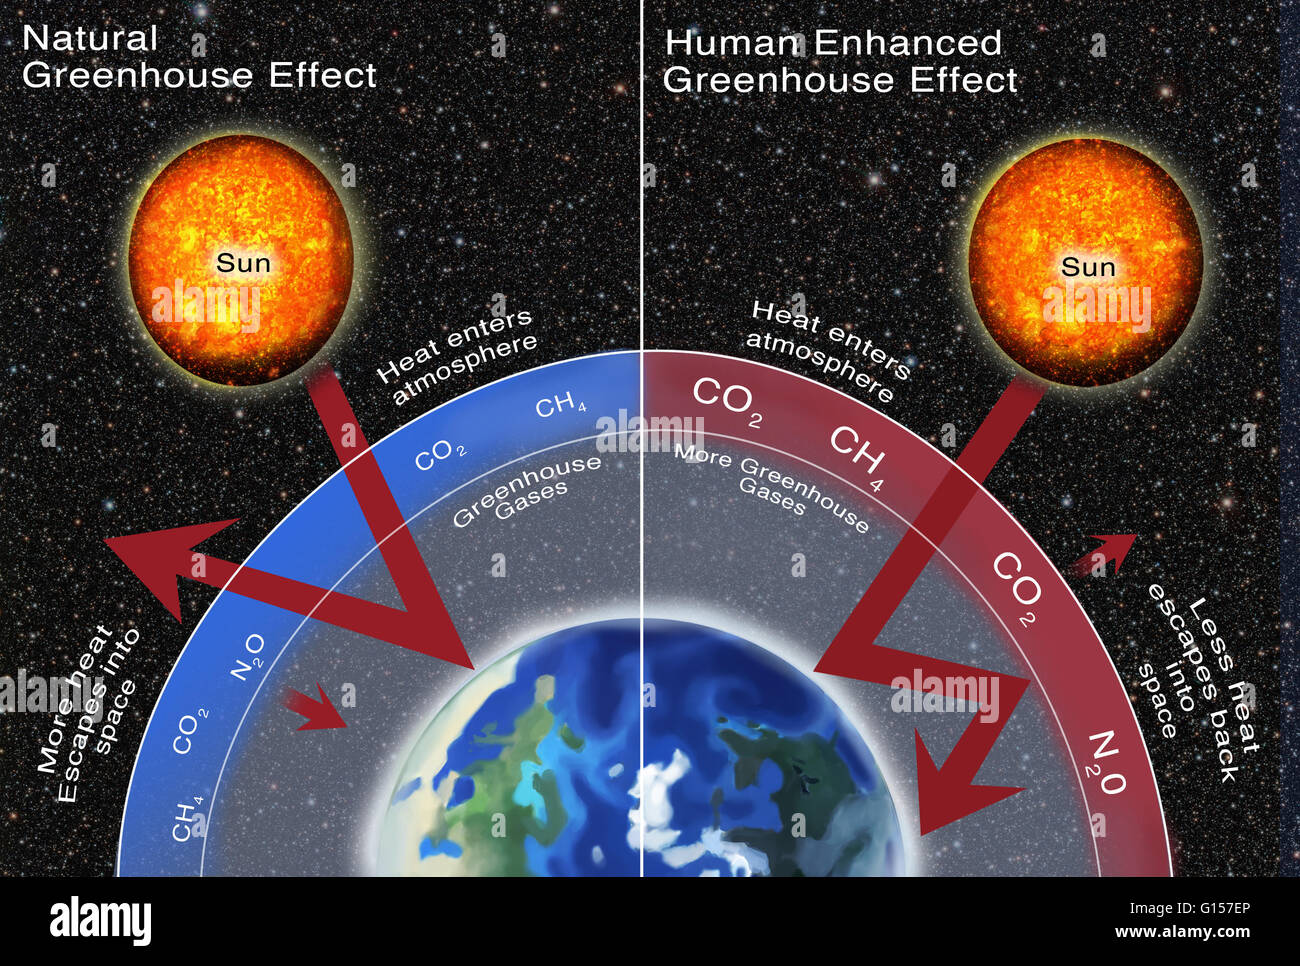 Greenhouse gas effect comparison. Illustration comparing the natural greenhouse gases emitted to the human enhanced greenhouse gases emitted. With a higher emission of greenhouse gases, shown on the right, more heat is trapped in the atmosphere (red arrow Stock Photo